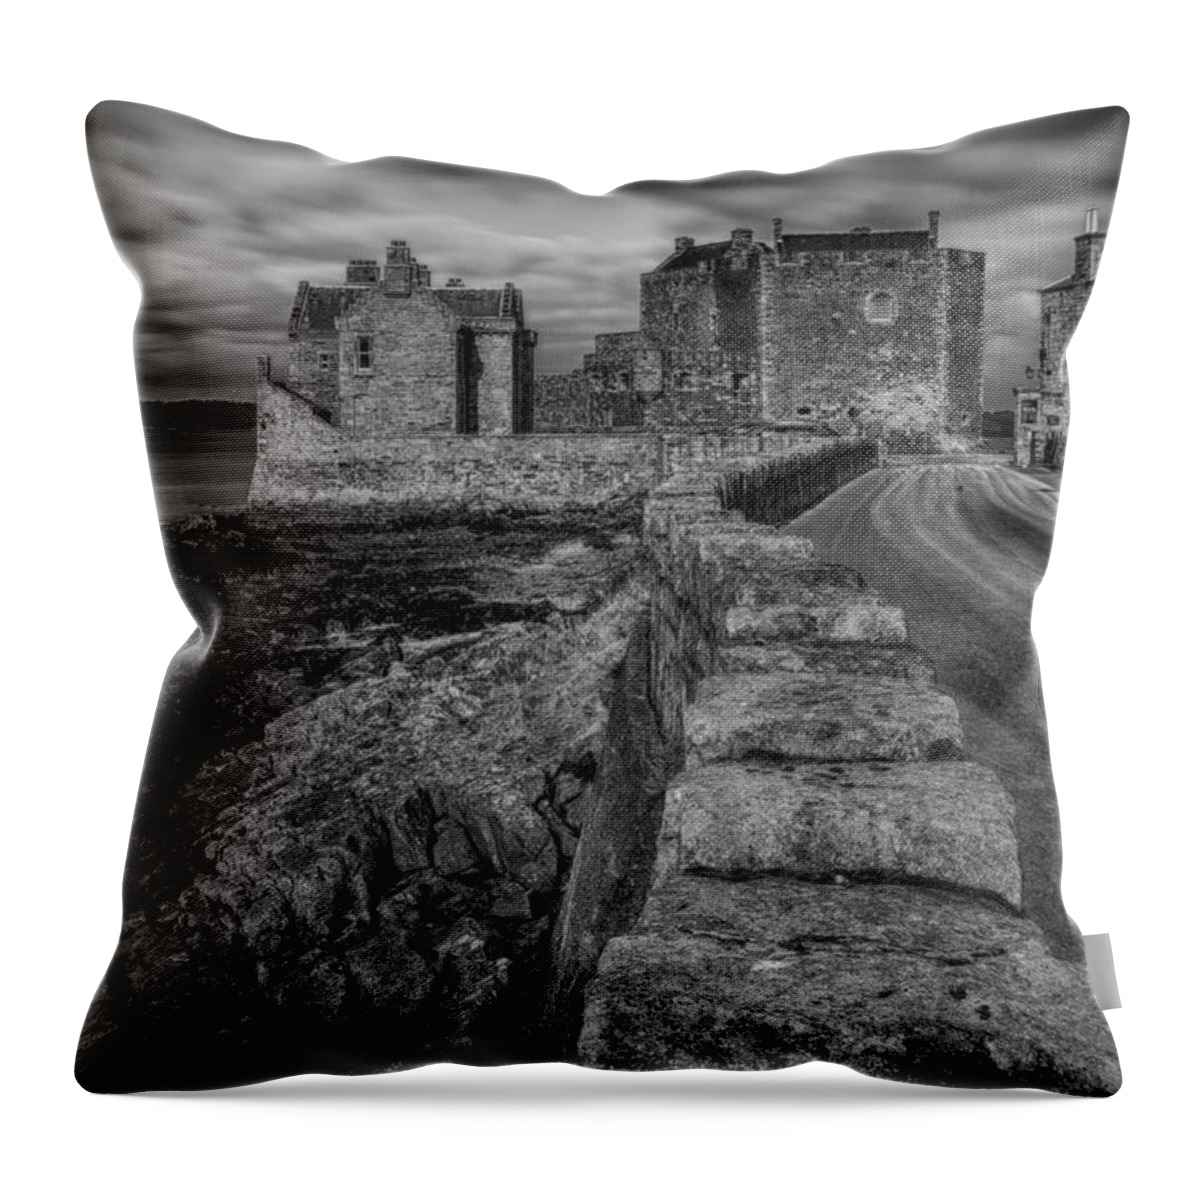 Blackness Castle Throw Pillow featuring the photograph Blackness Castle by Douglas Milne